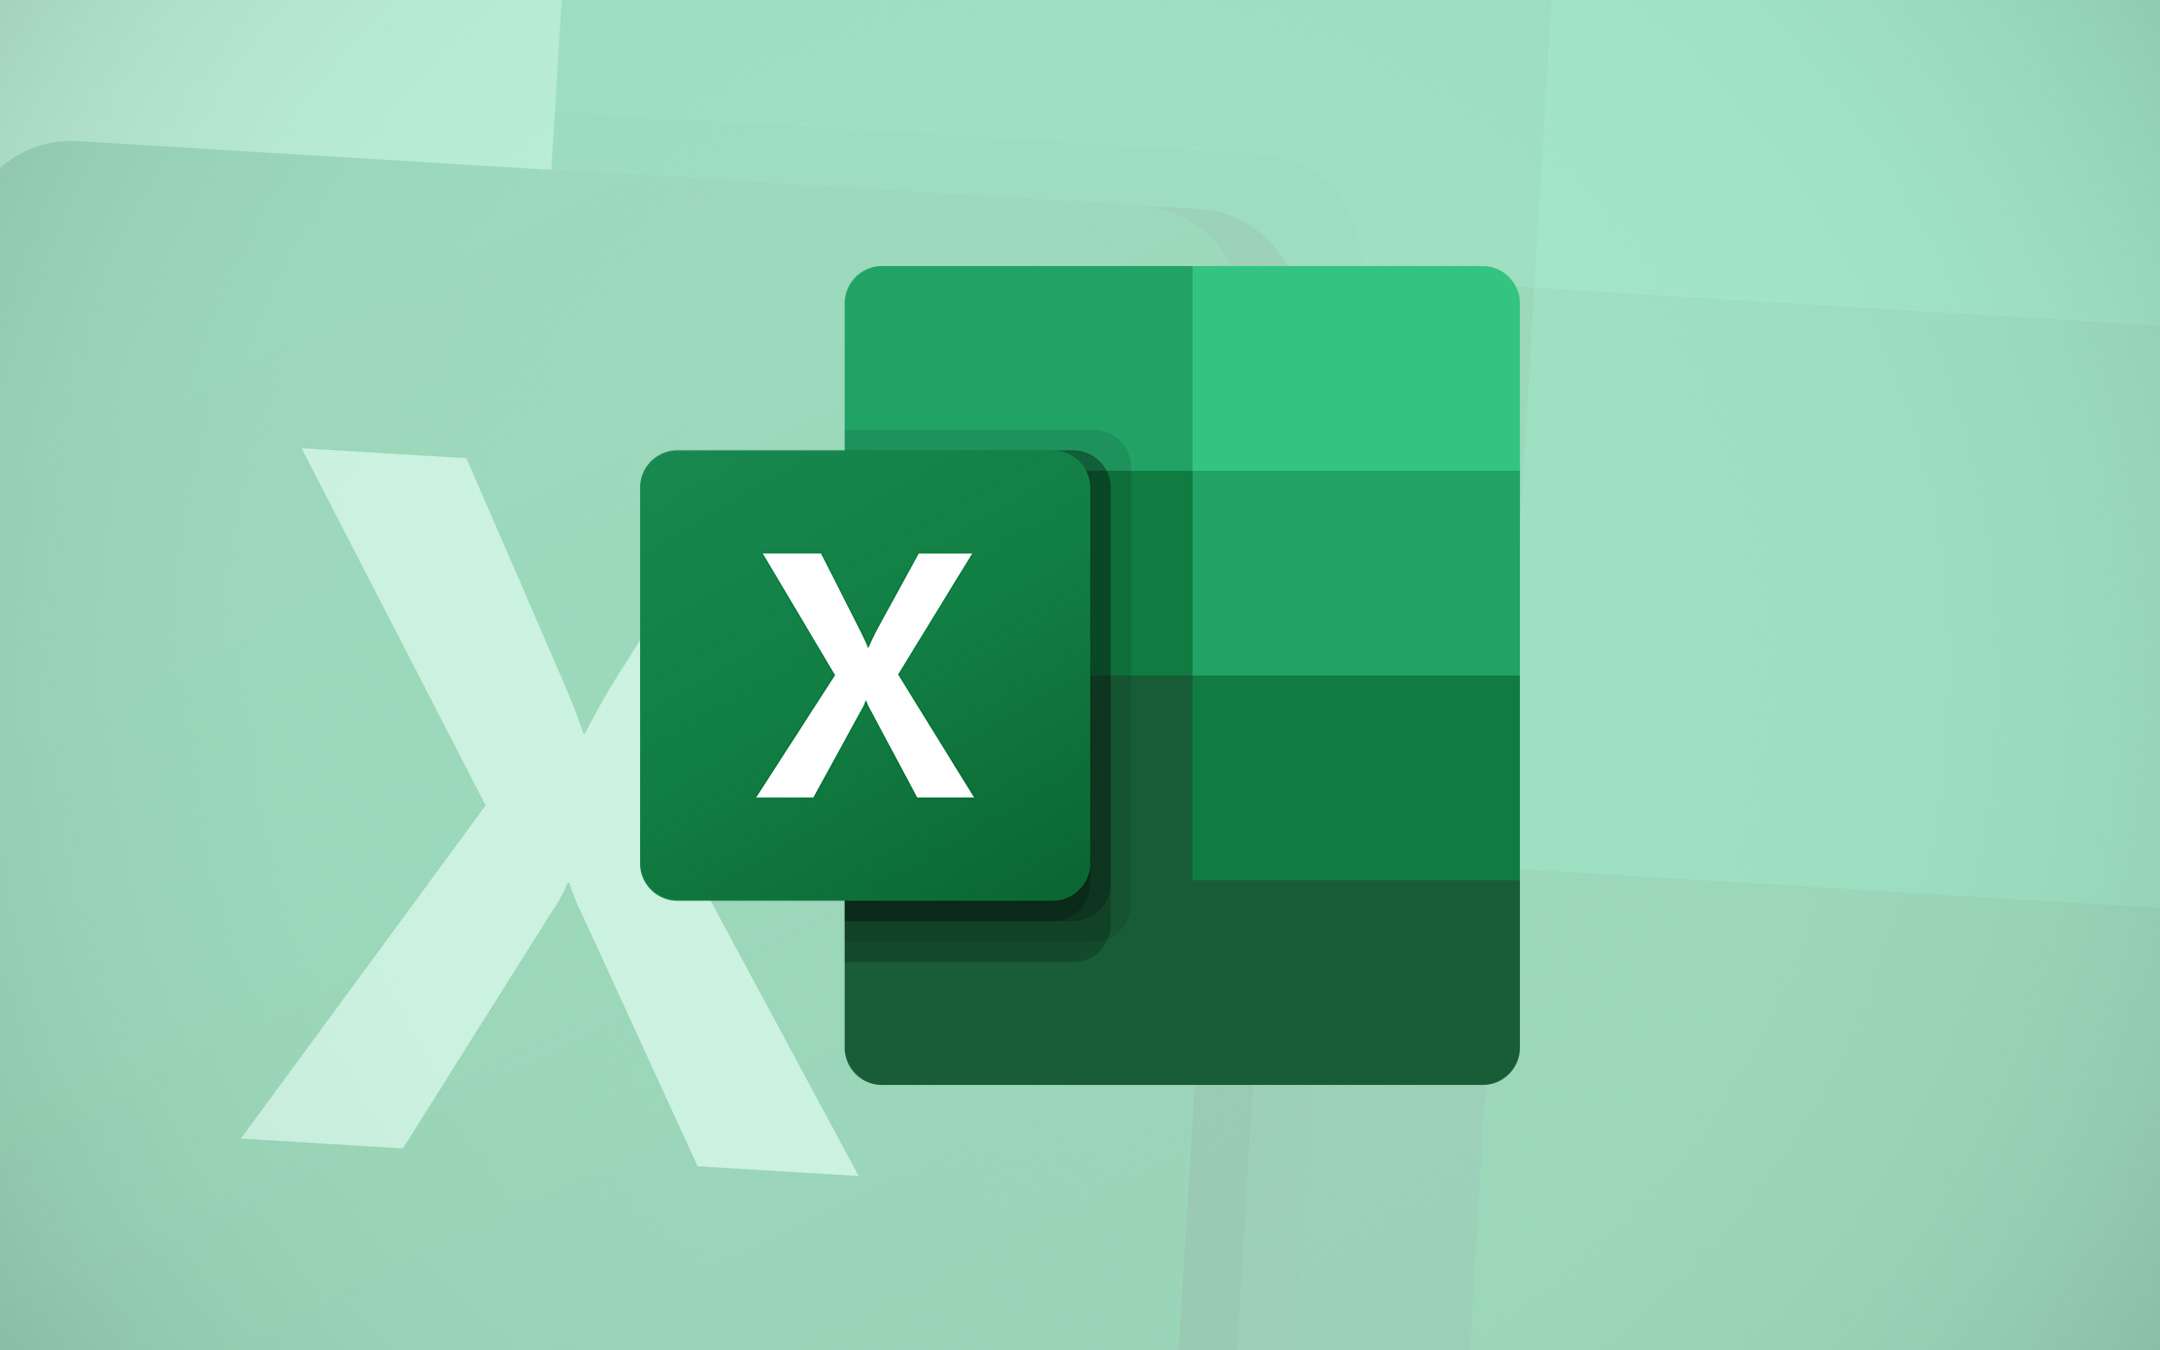 Microsoft updates Excel for Apple Silicon Macs